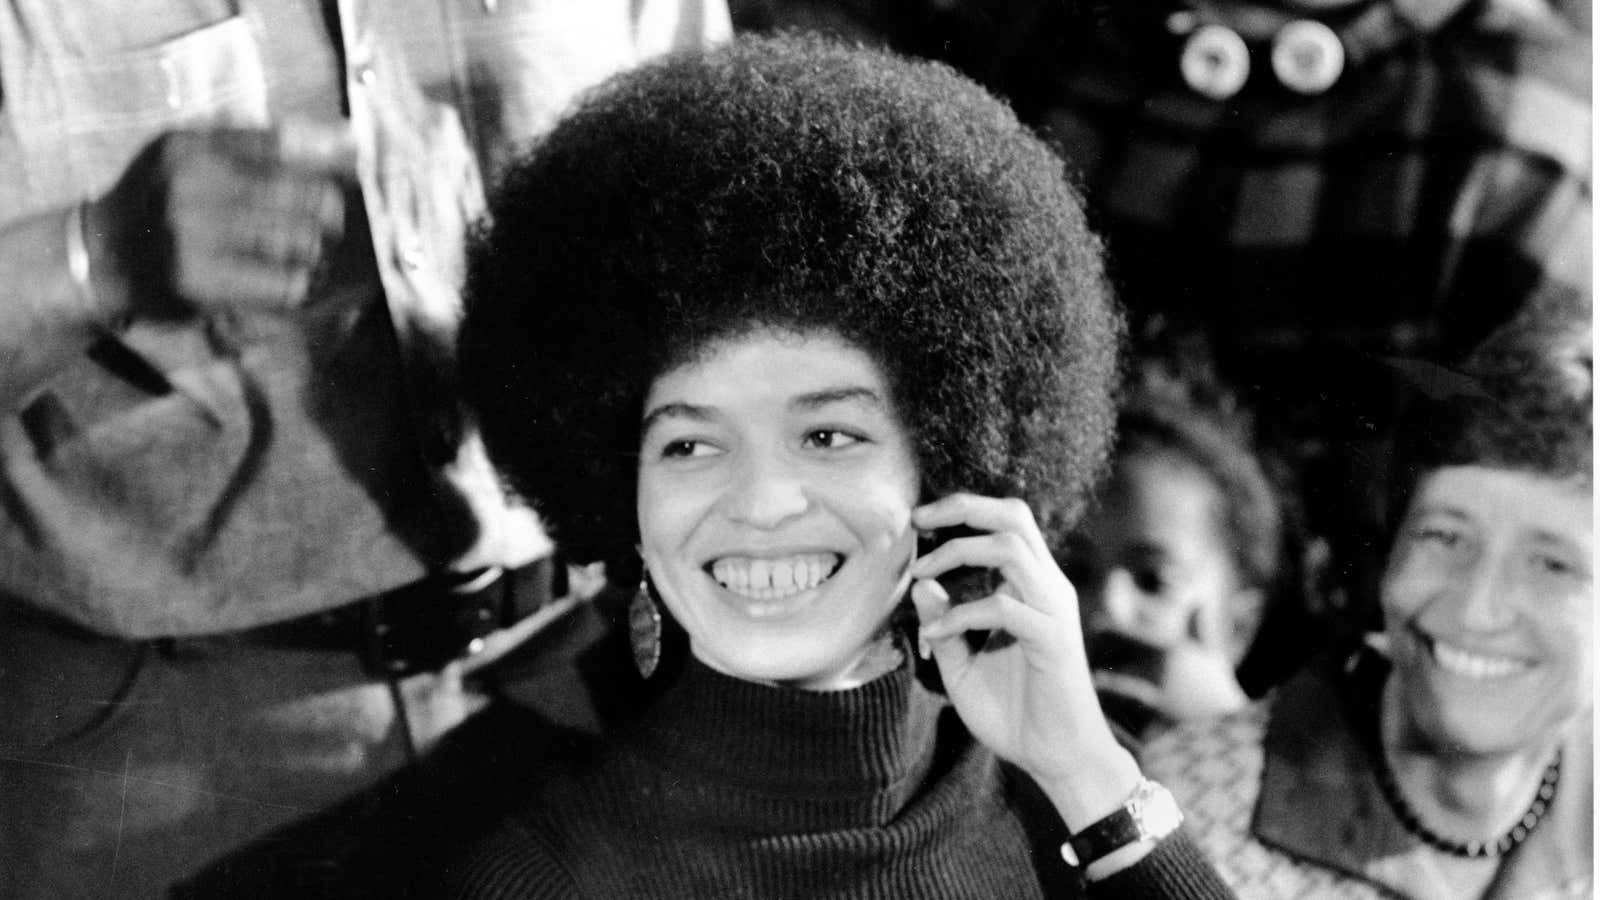 When Angela Davis first wore her Afro, it was radical. More than 40 years later, it still is.